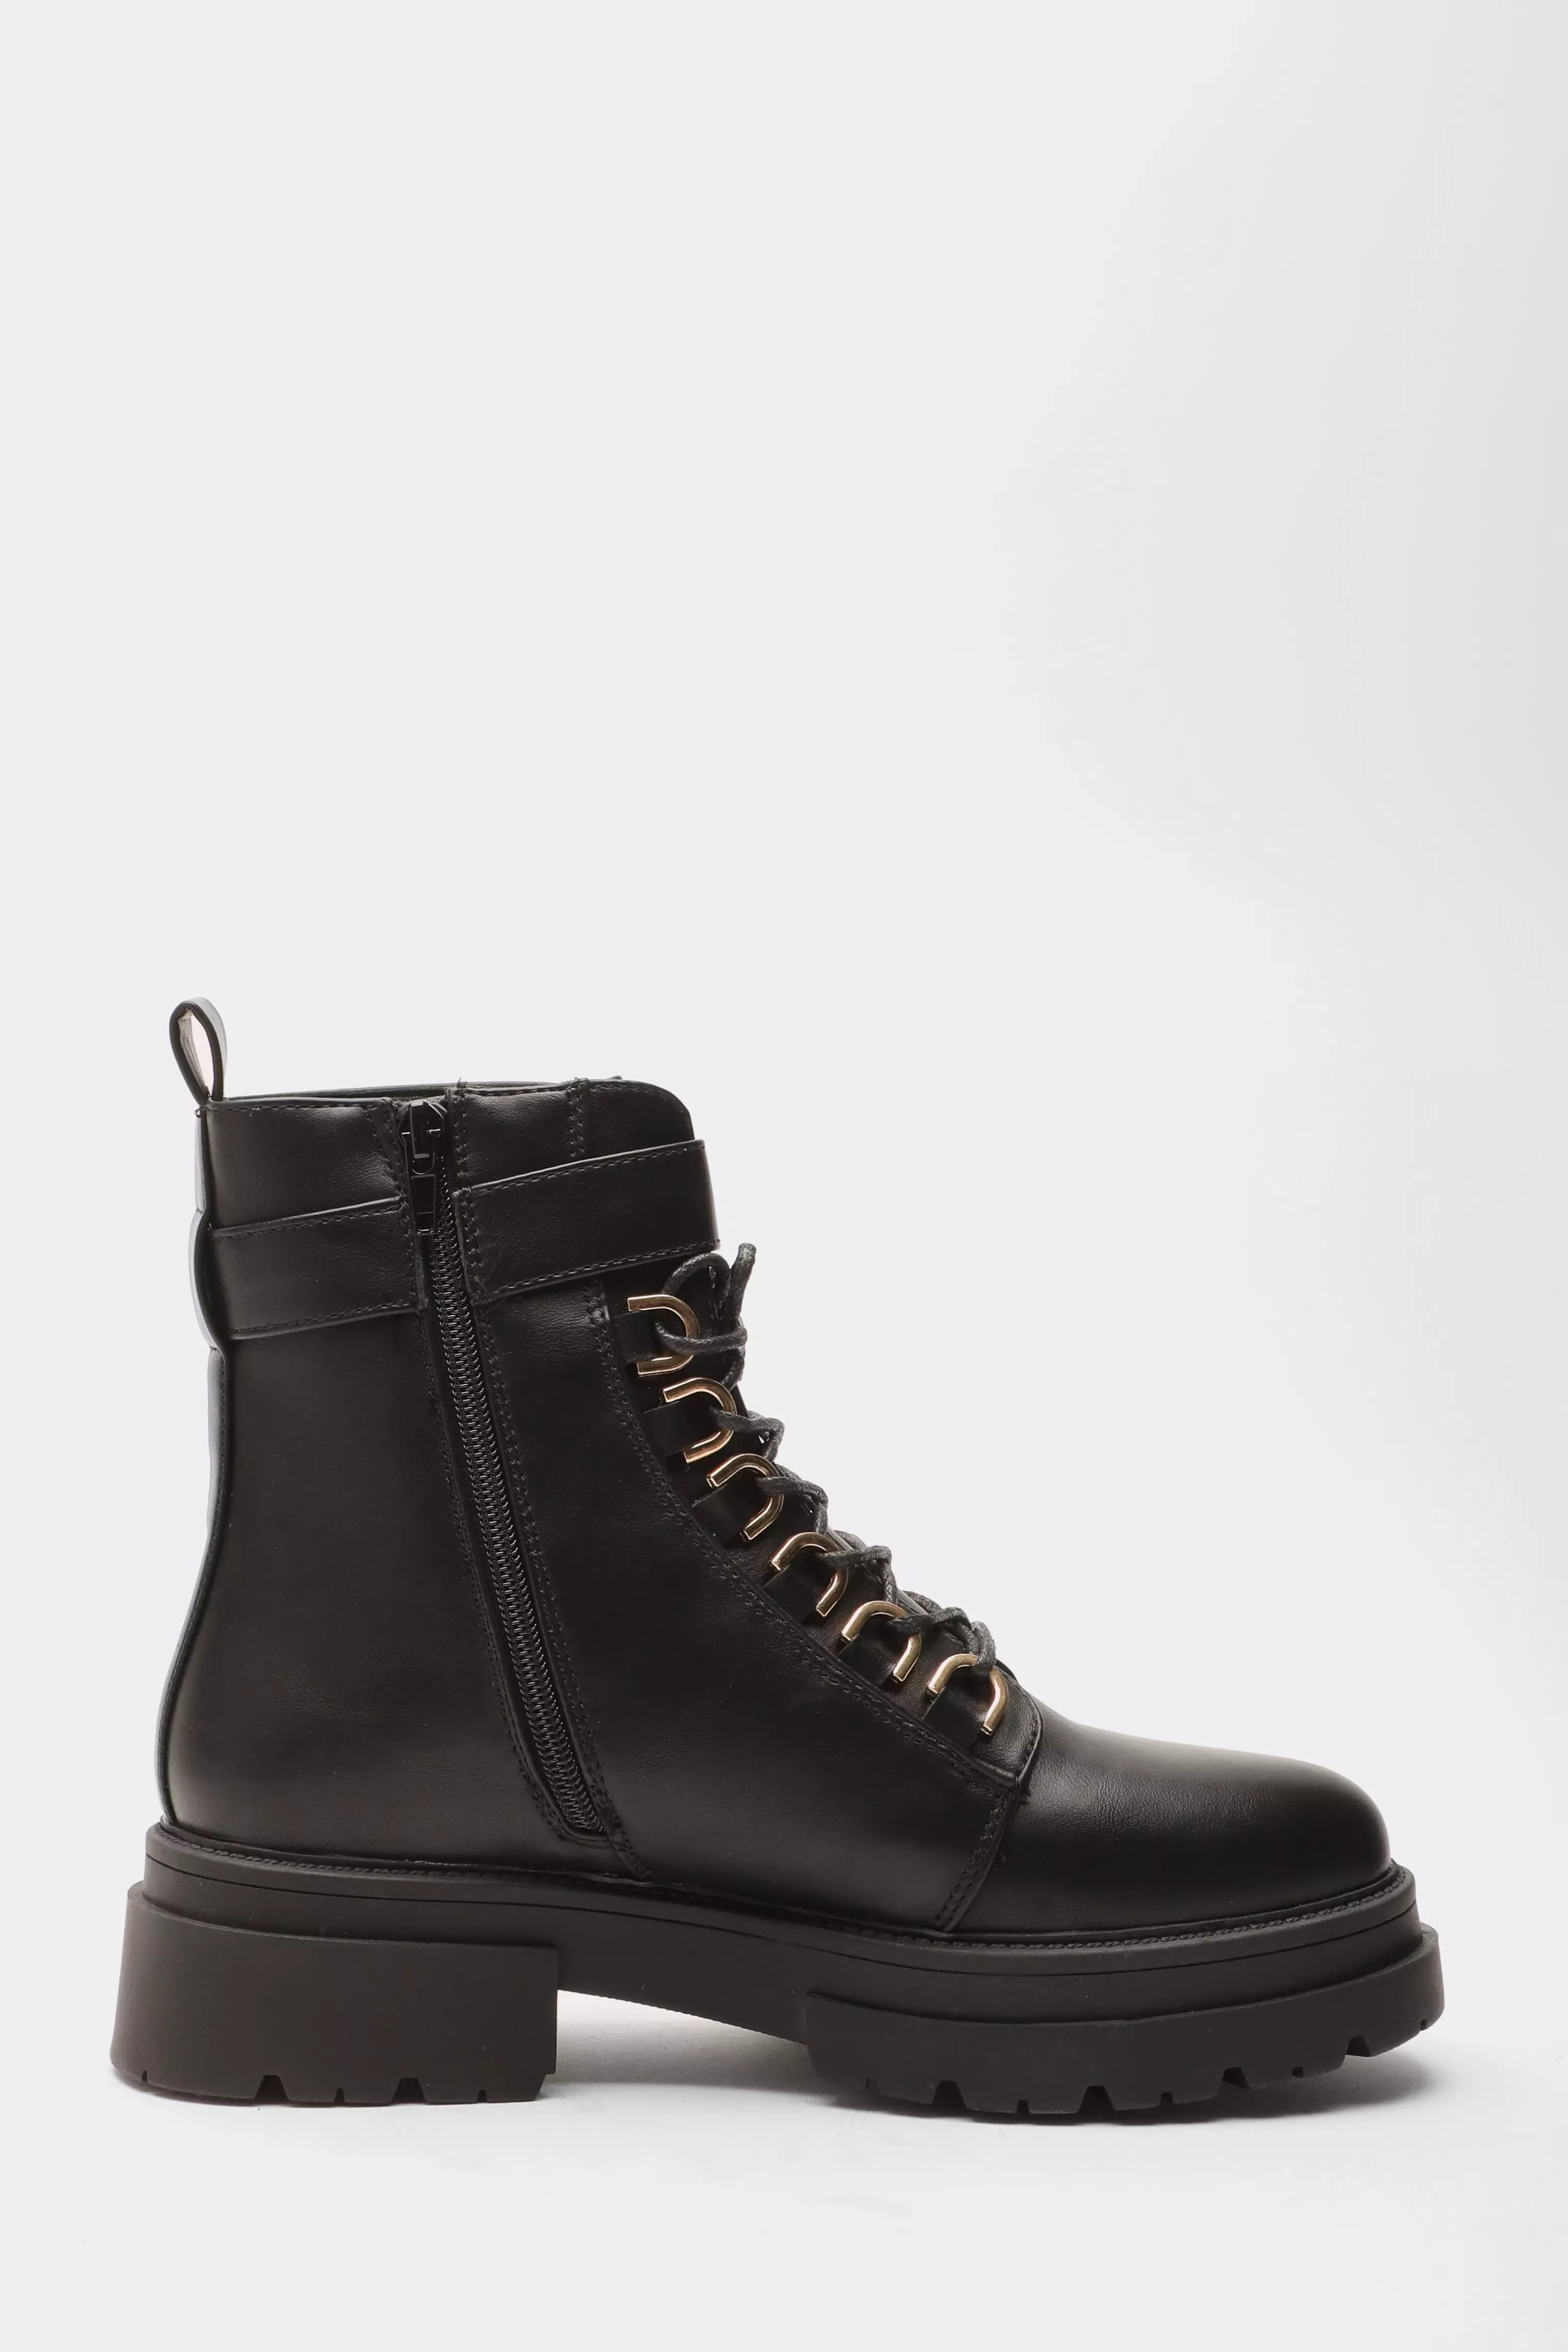 Black Faux Leather Chunky Buckle Boots - QUIZ Clothing